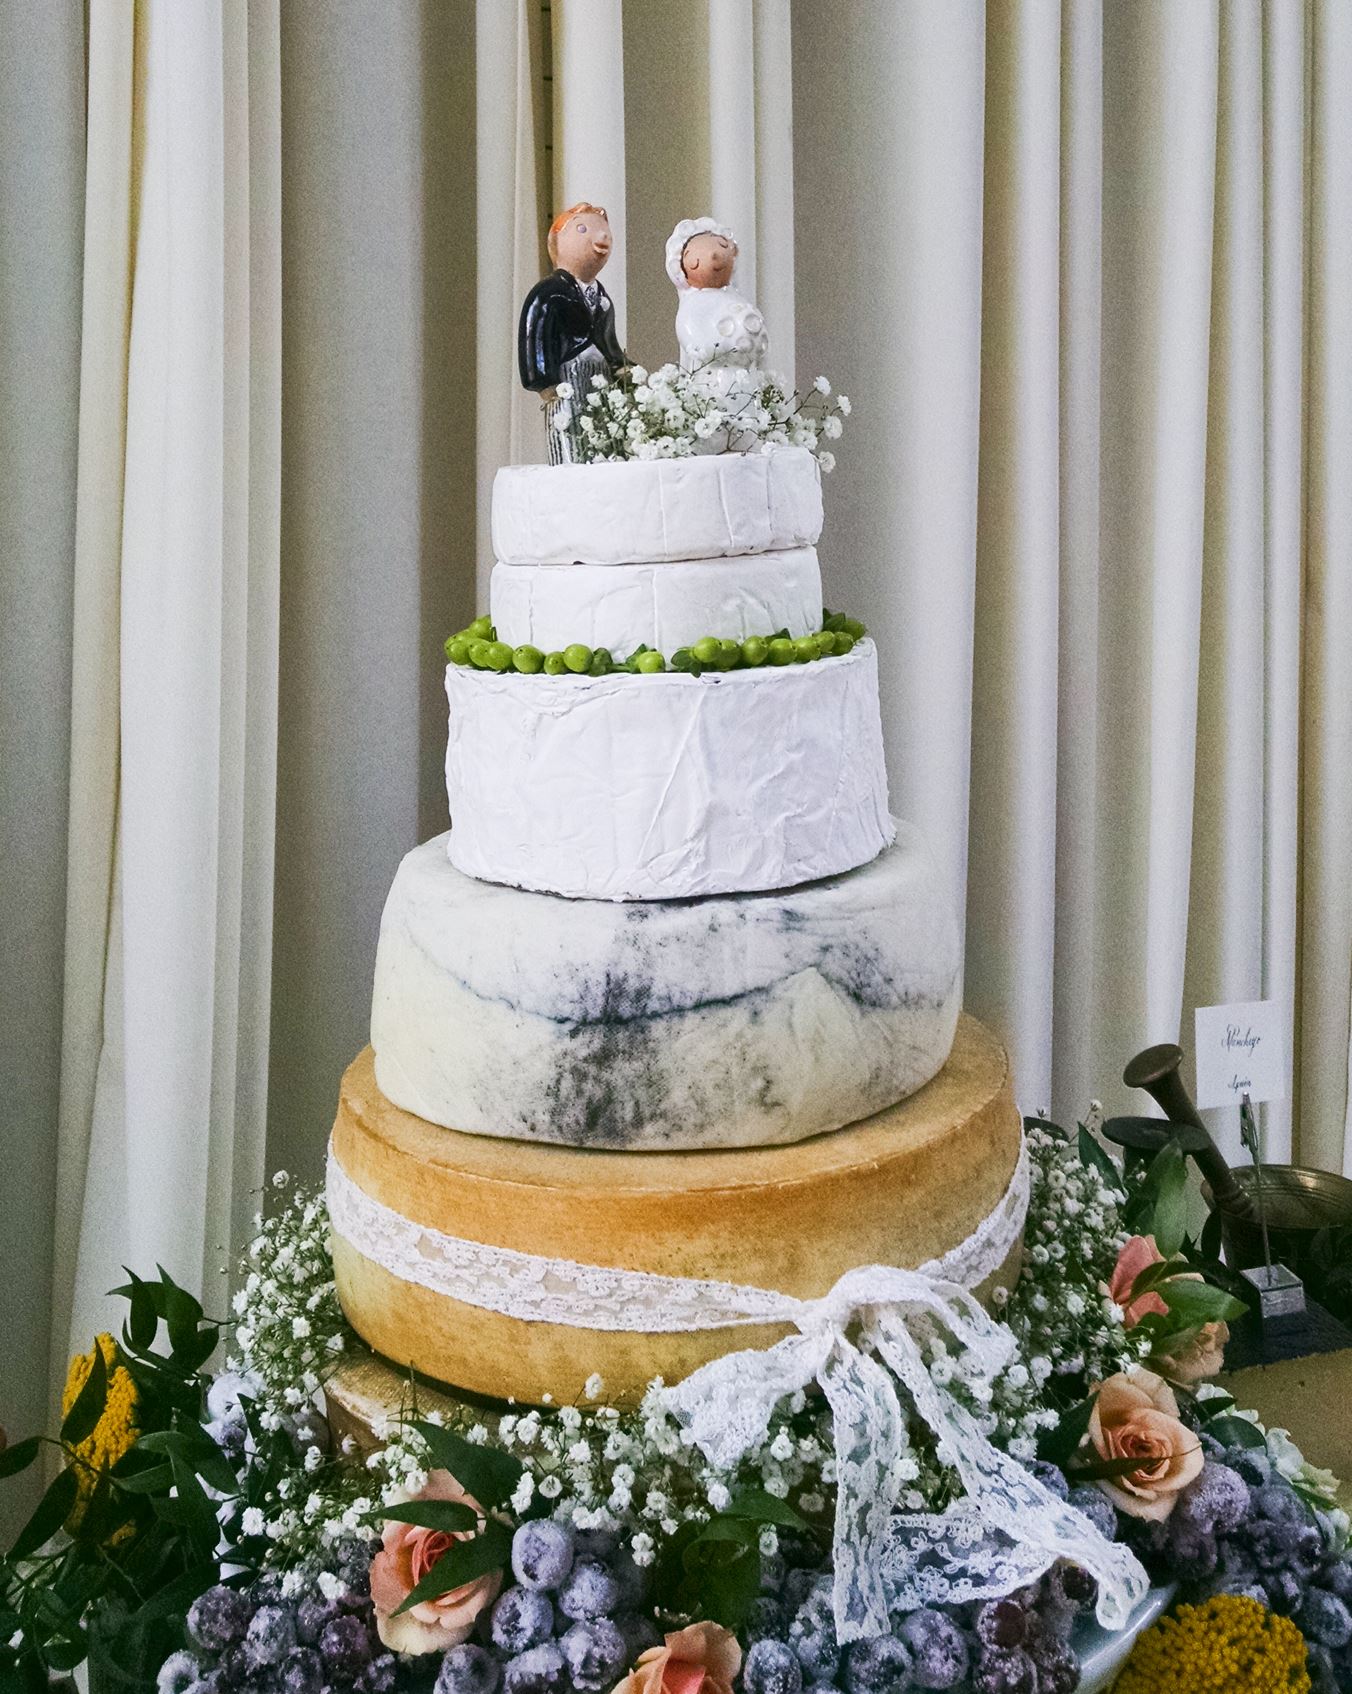 Are wedding cakes real